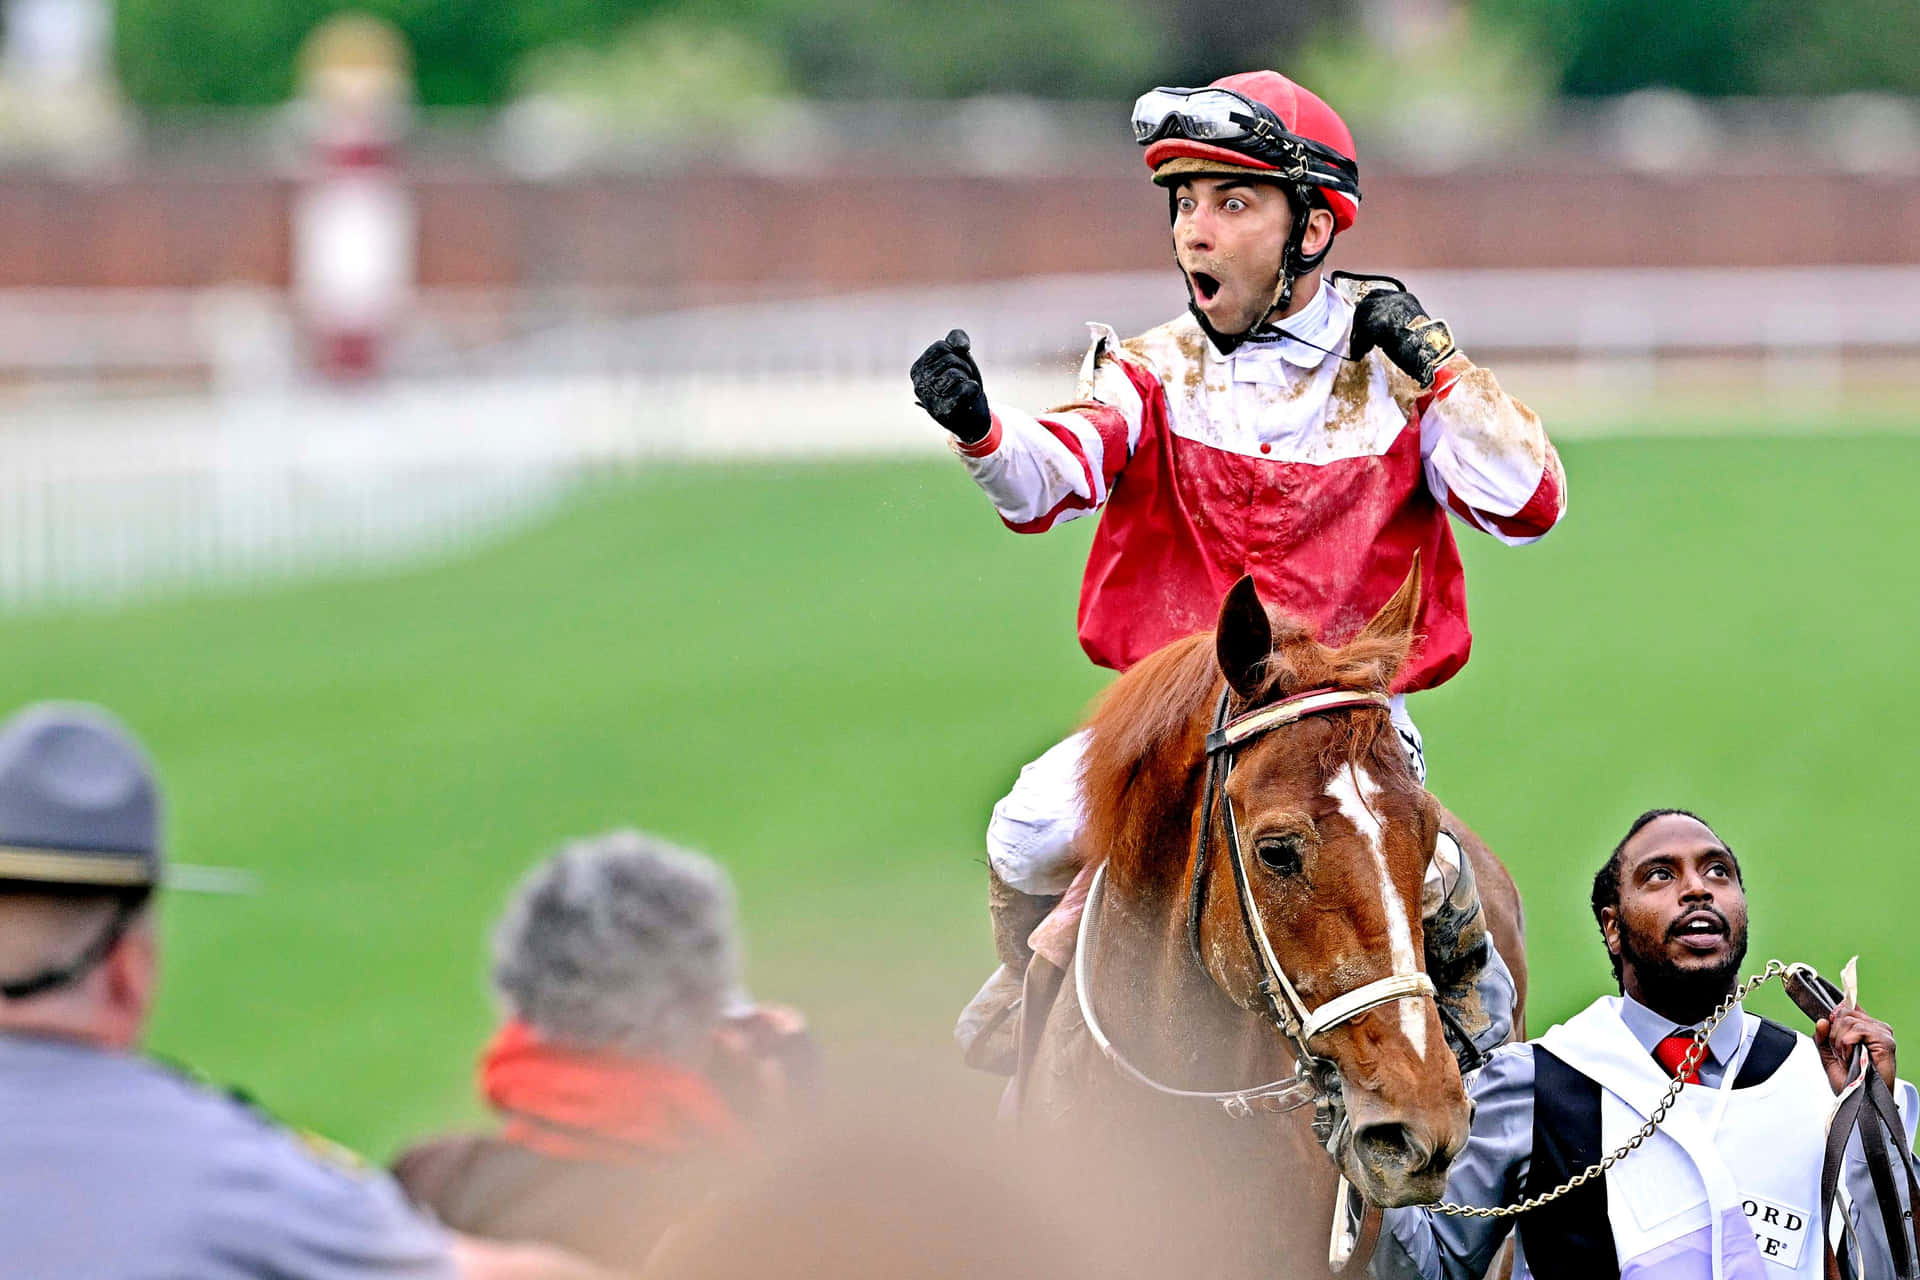 A Jockey Is Riding A Horse And Waving To The Crowd